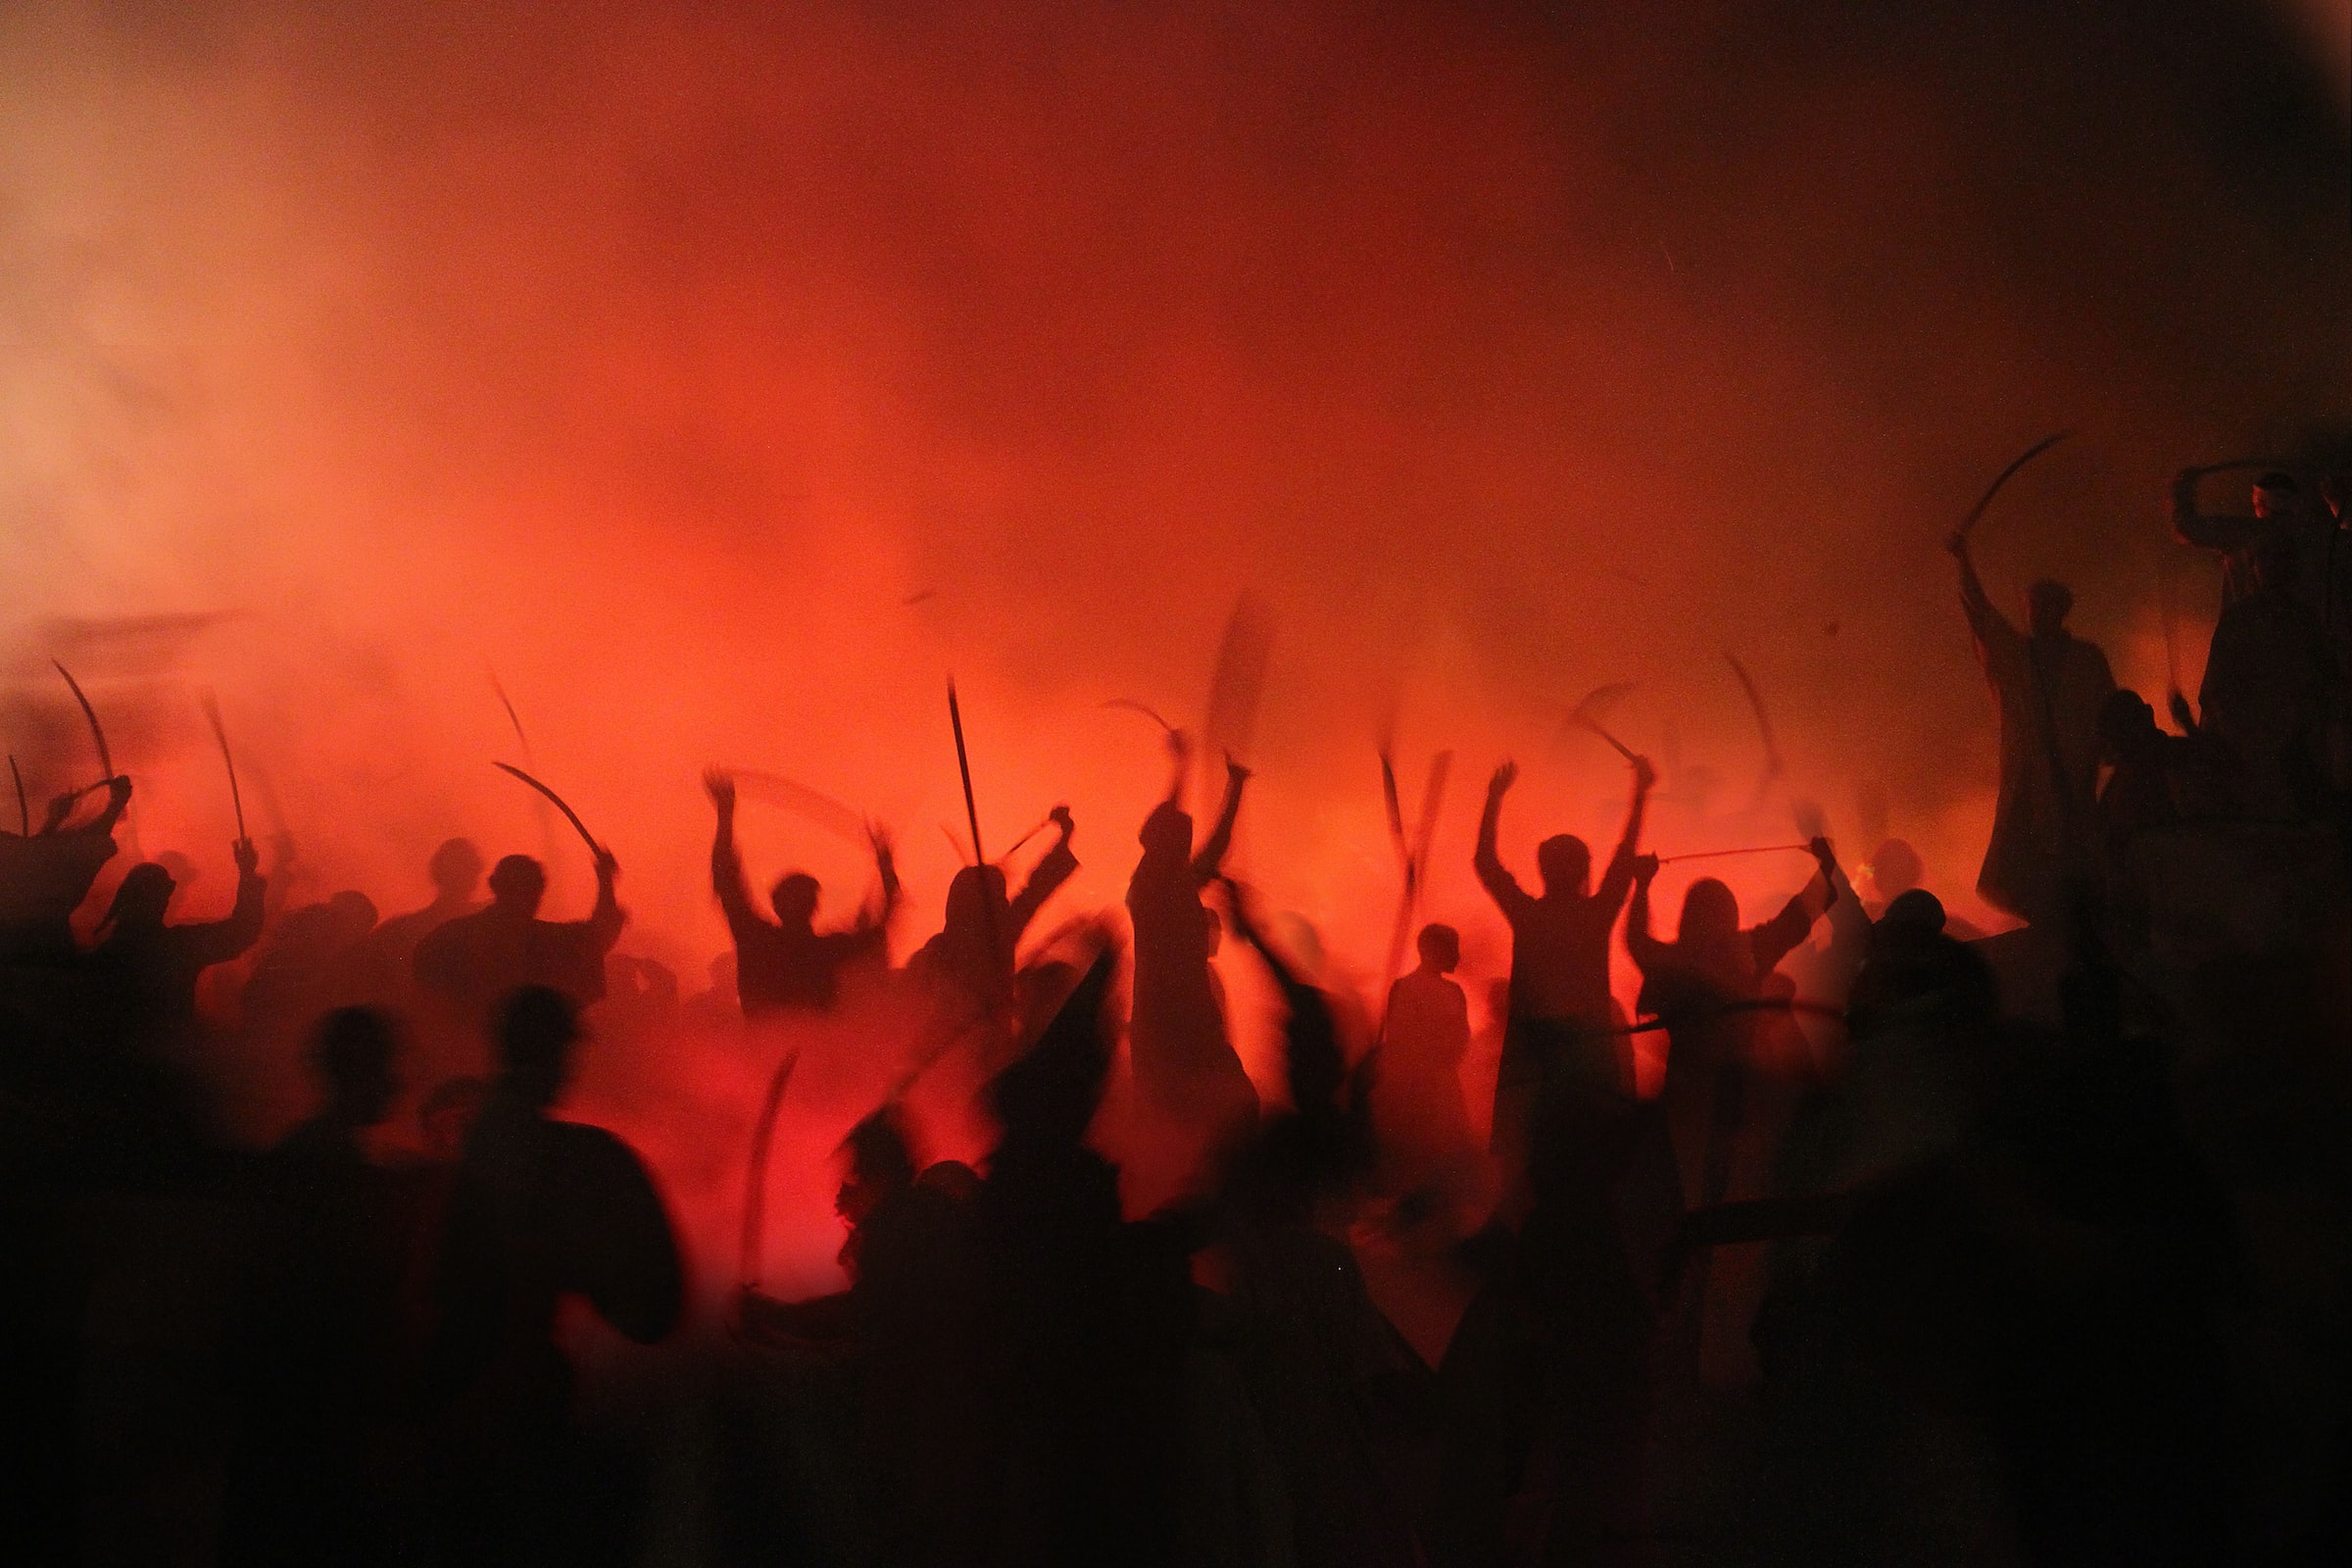 Rioters silhouetted against the smokey orange glow of flames